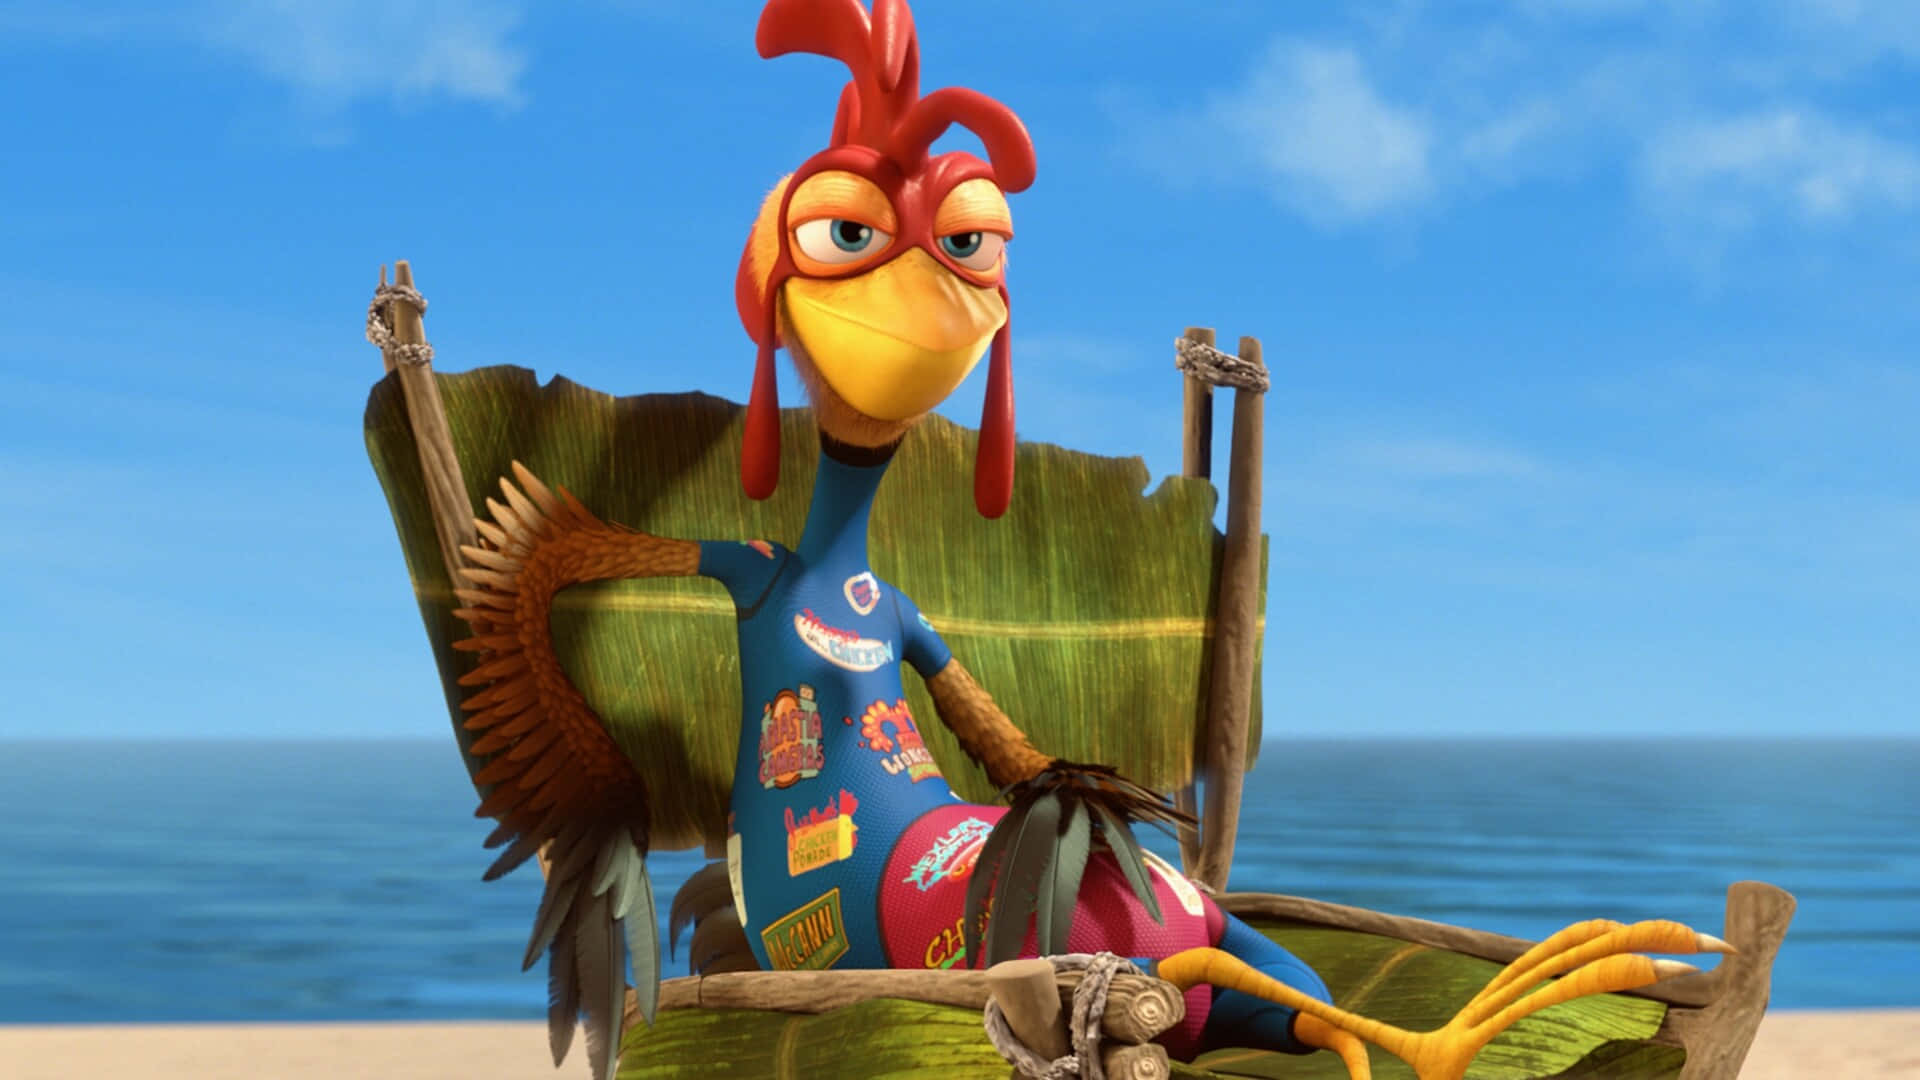 Surfing Rooster Animated Character Wallpaper